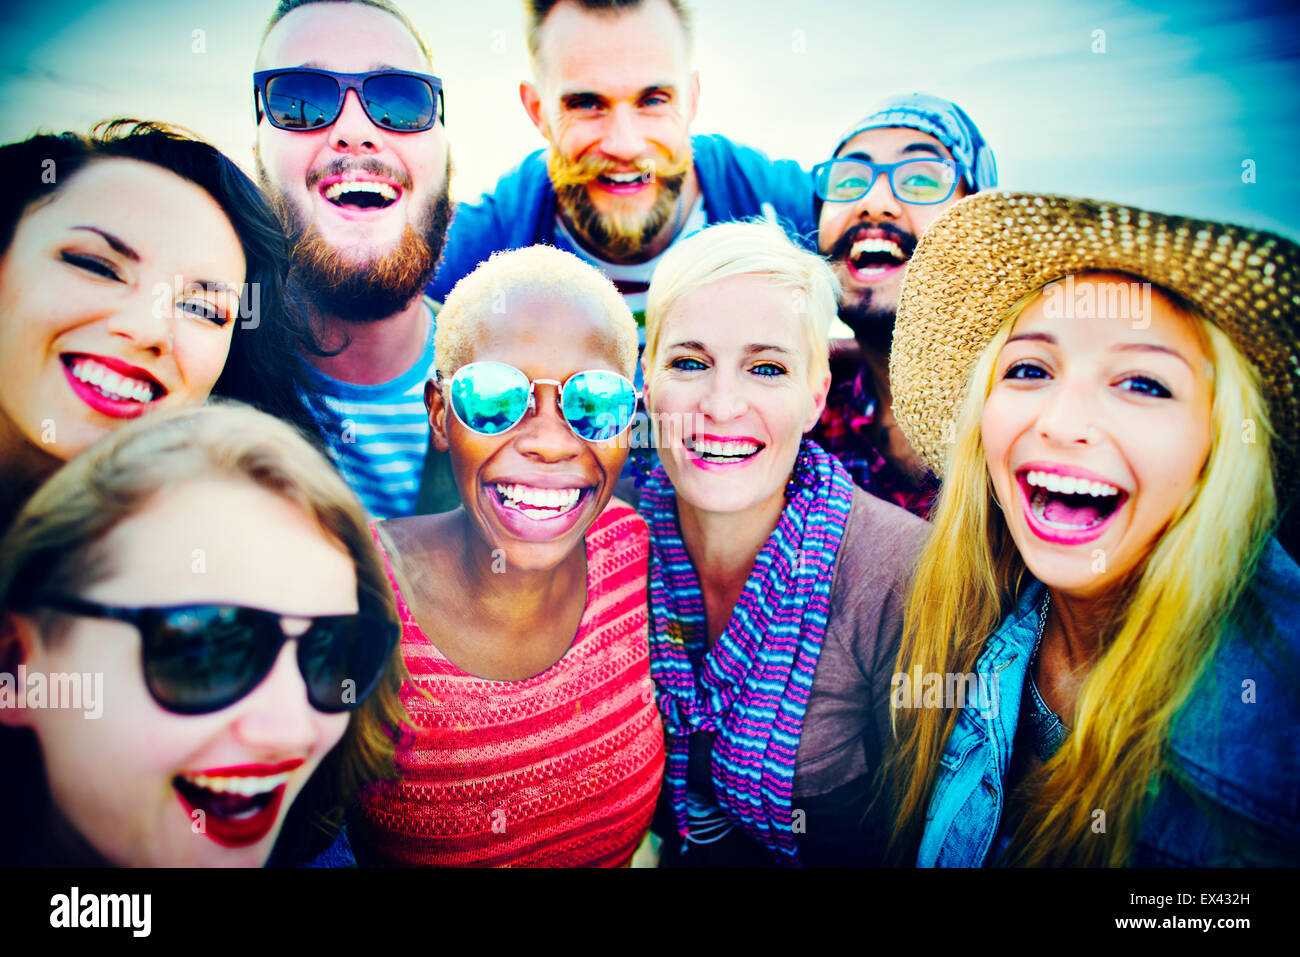 Celebration Cheerful Enjoying Party Leisure Happiness Concept Stock Photo